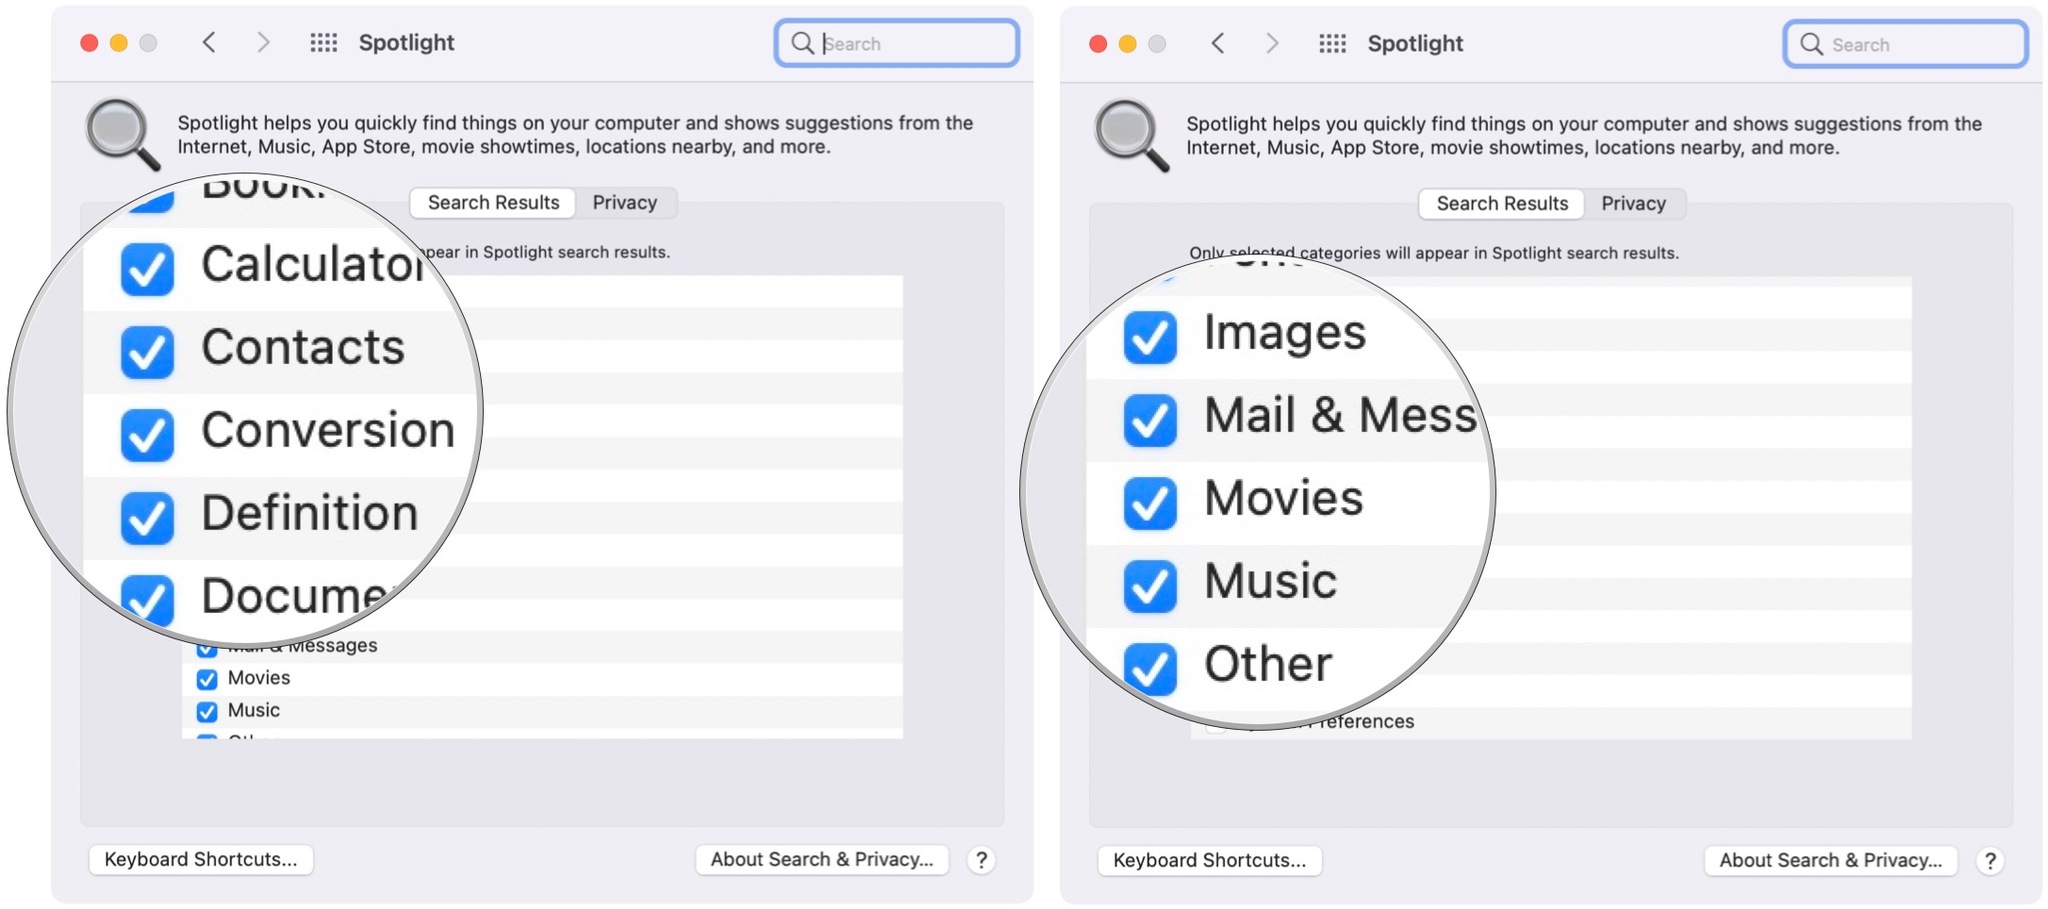 To customize Spotlight search results, click the checkbox next to the category to change what Spotlight will show you.